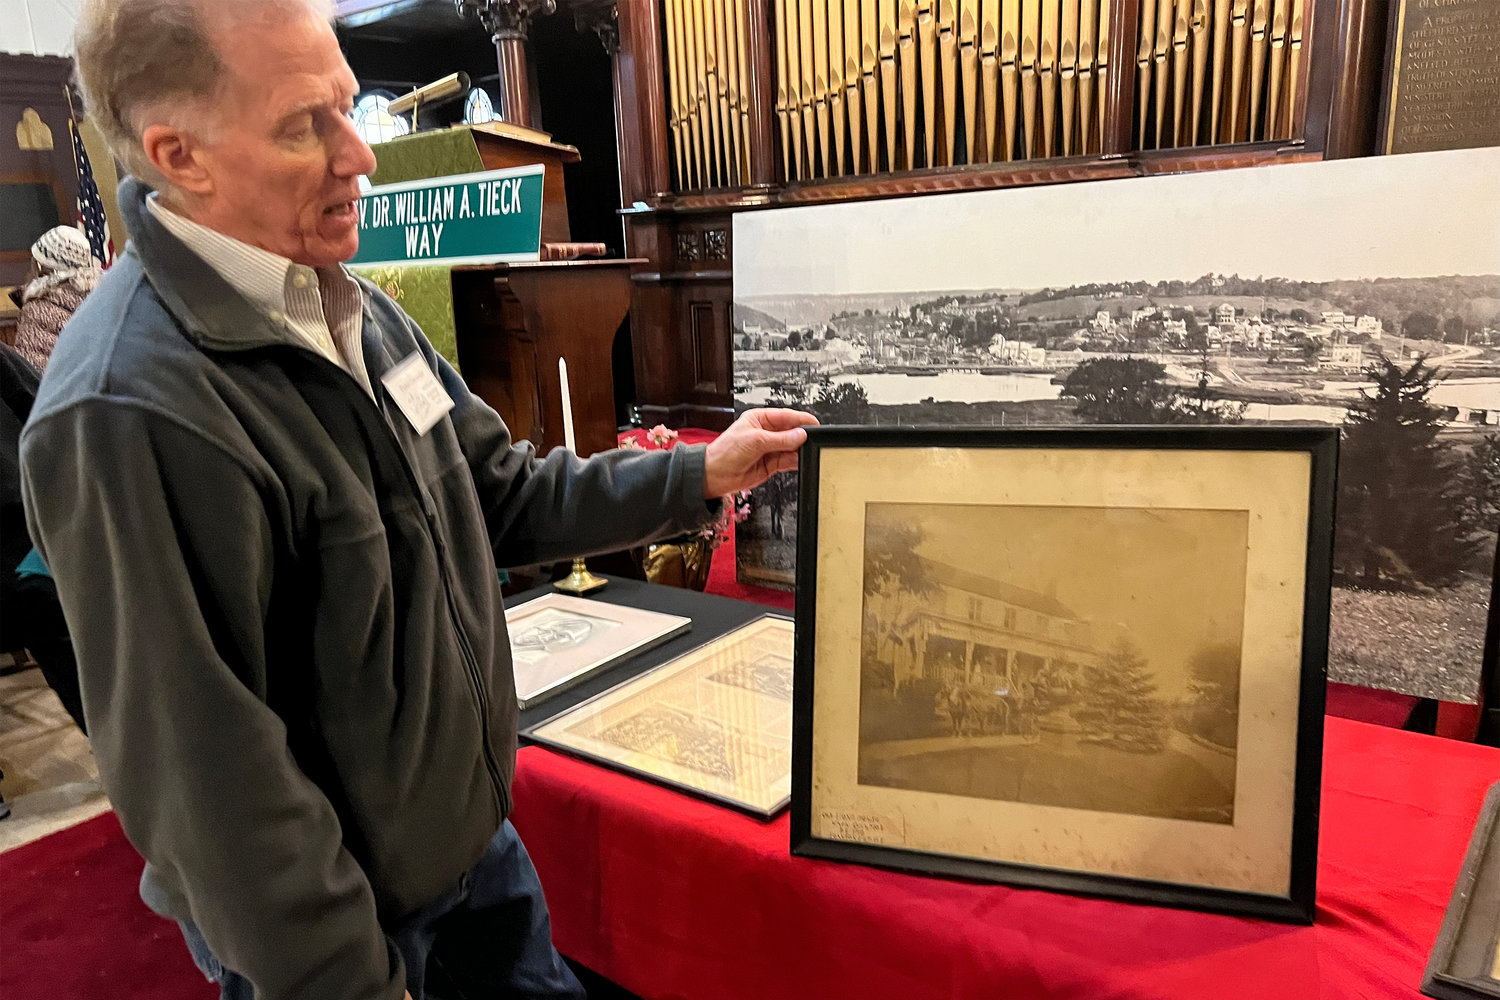 Former Kingsbridge Historical Society president Peter Ostrander shows a photo of a pre-revolutionary home on Kappock Street. That home was taken down by New York urban planner Robert Moses.